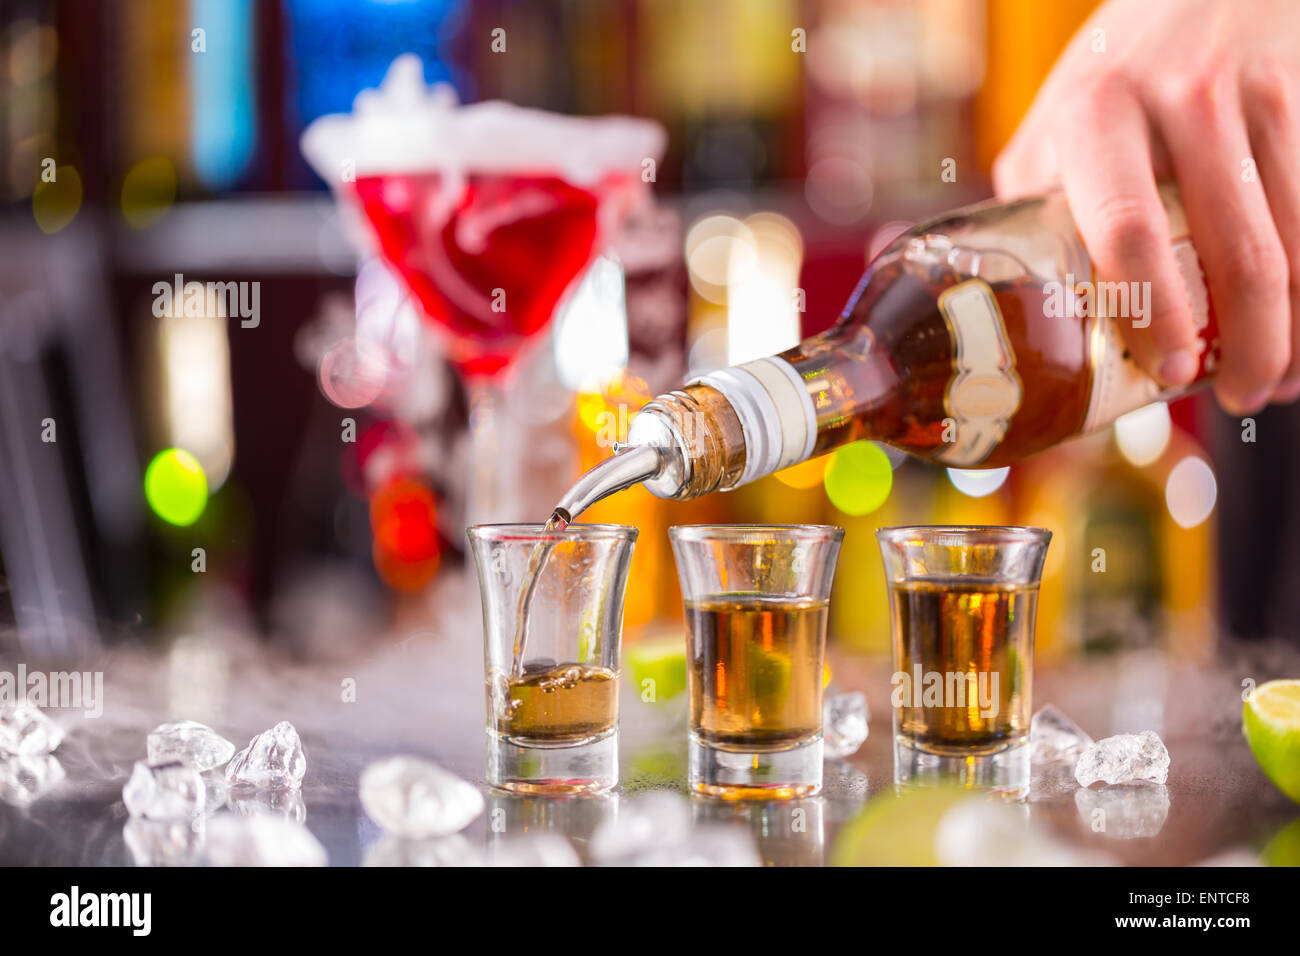 Barman pouring hard spirit into glasses in detail Stock Photo